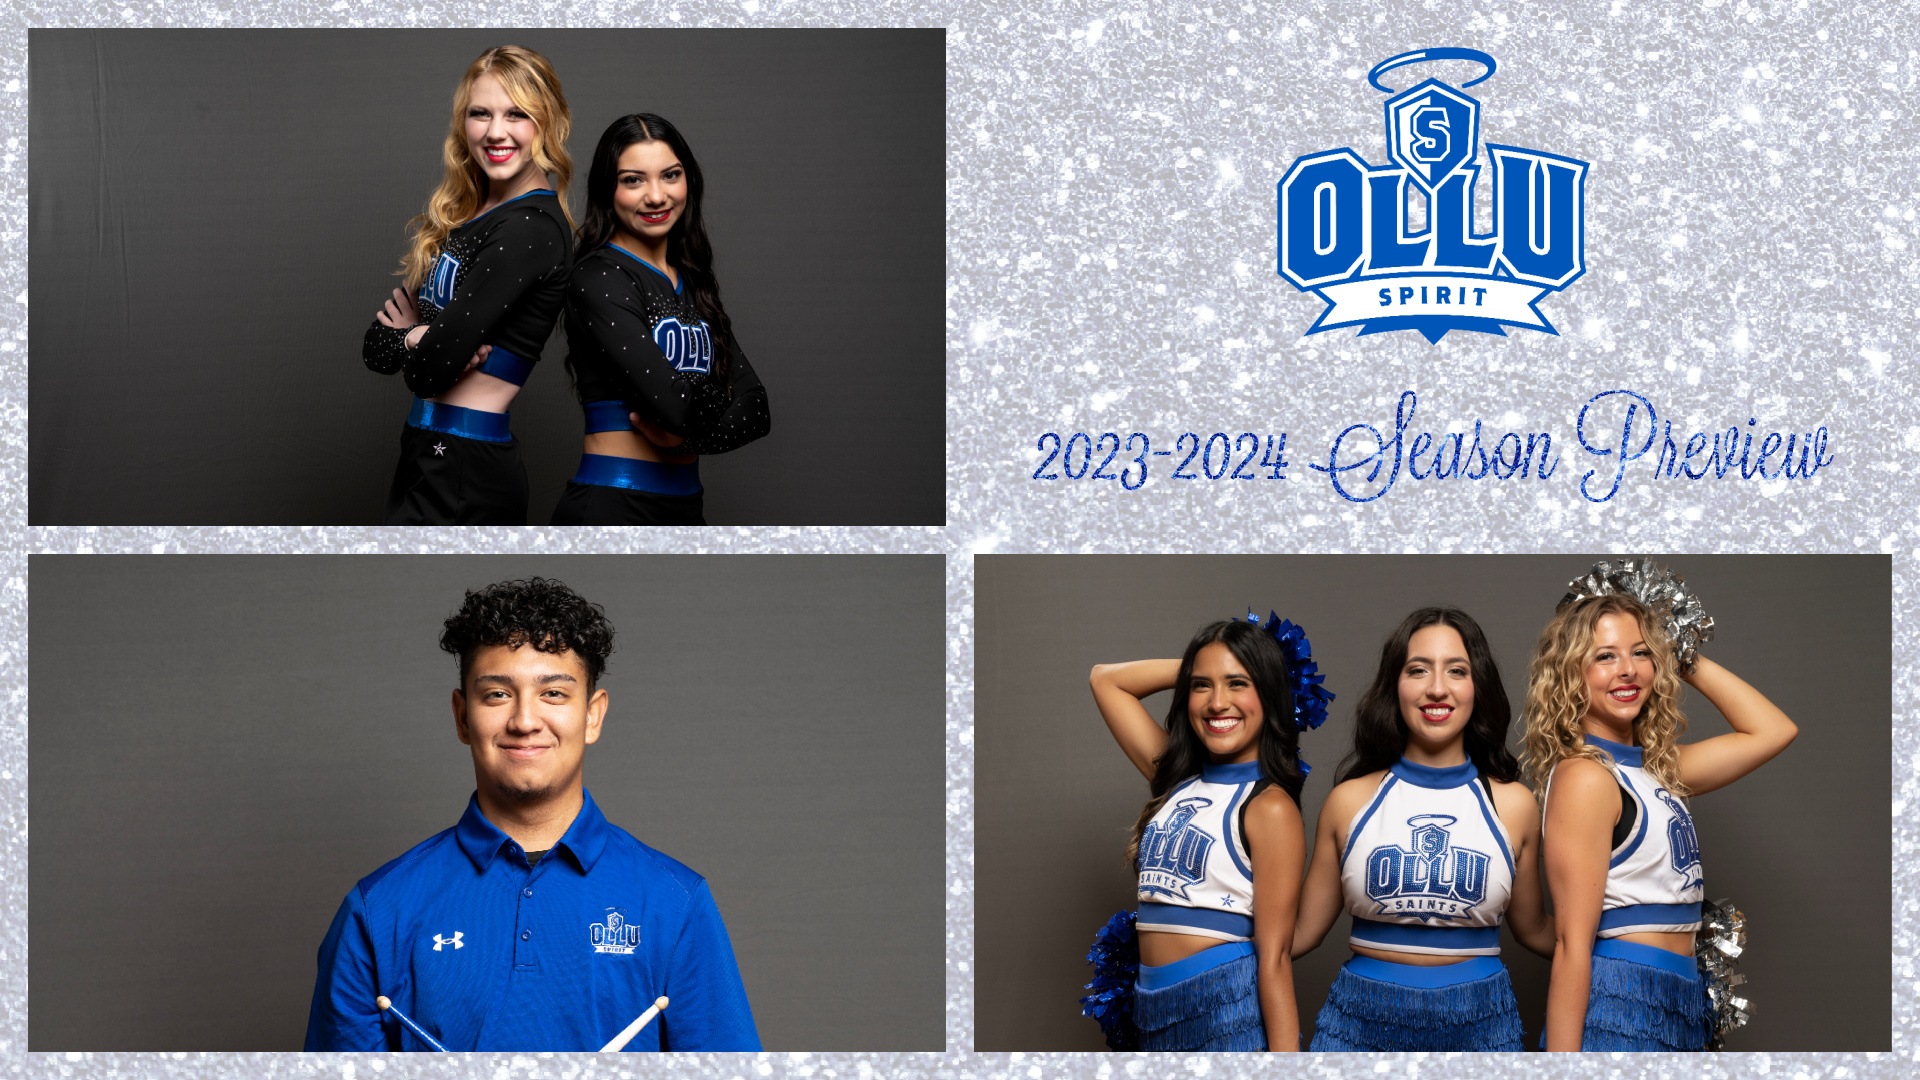 OLLU Spirit Heads Into New Season of Competitions and Community Events